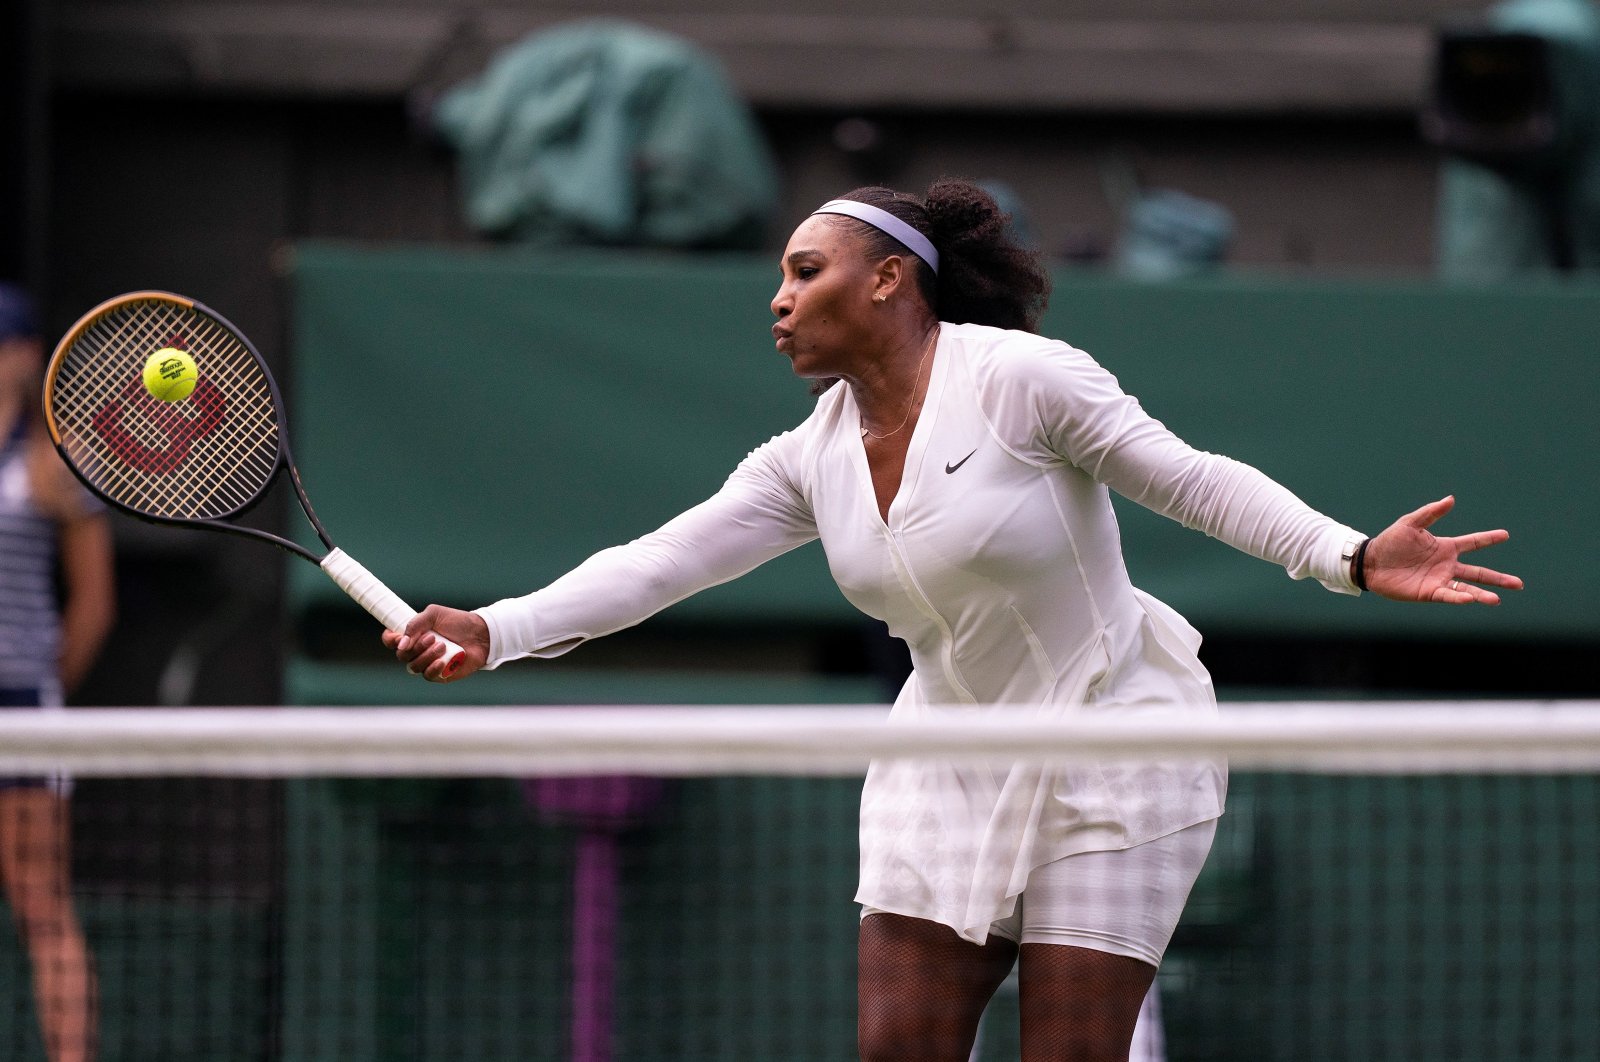 In this file photo, Serena Williams returns a shot during her first-round match against Harmony Tan (FRA) on Day 2 at All England Lawn Tennis and Croquet Club, London, United Kingdom, June 28, 2022. (Susan Mullane/USA TODAY Sports via Reuters)